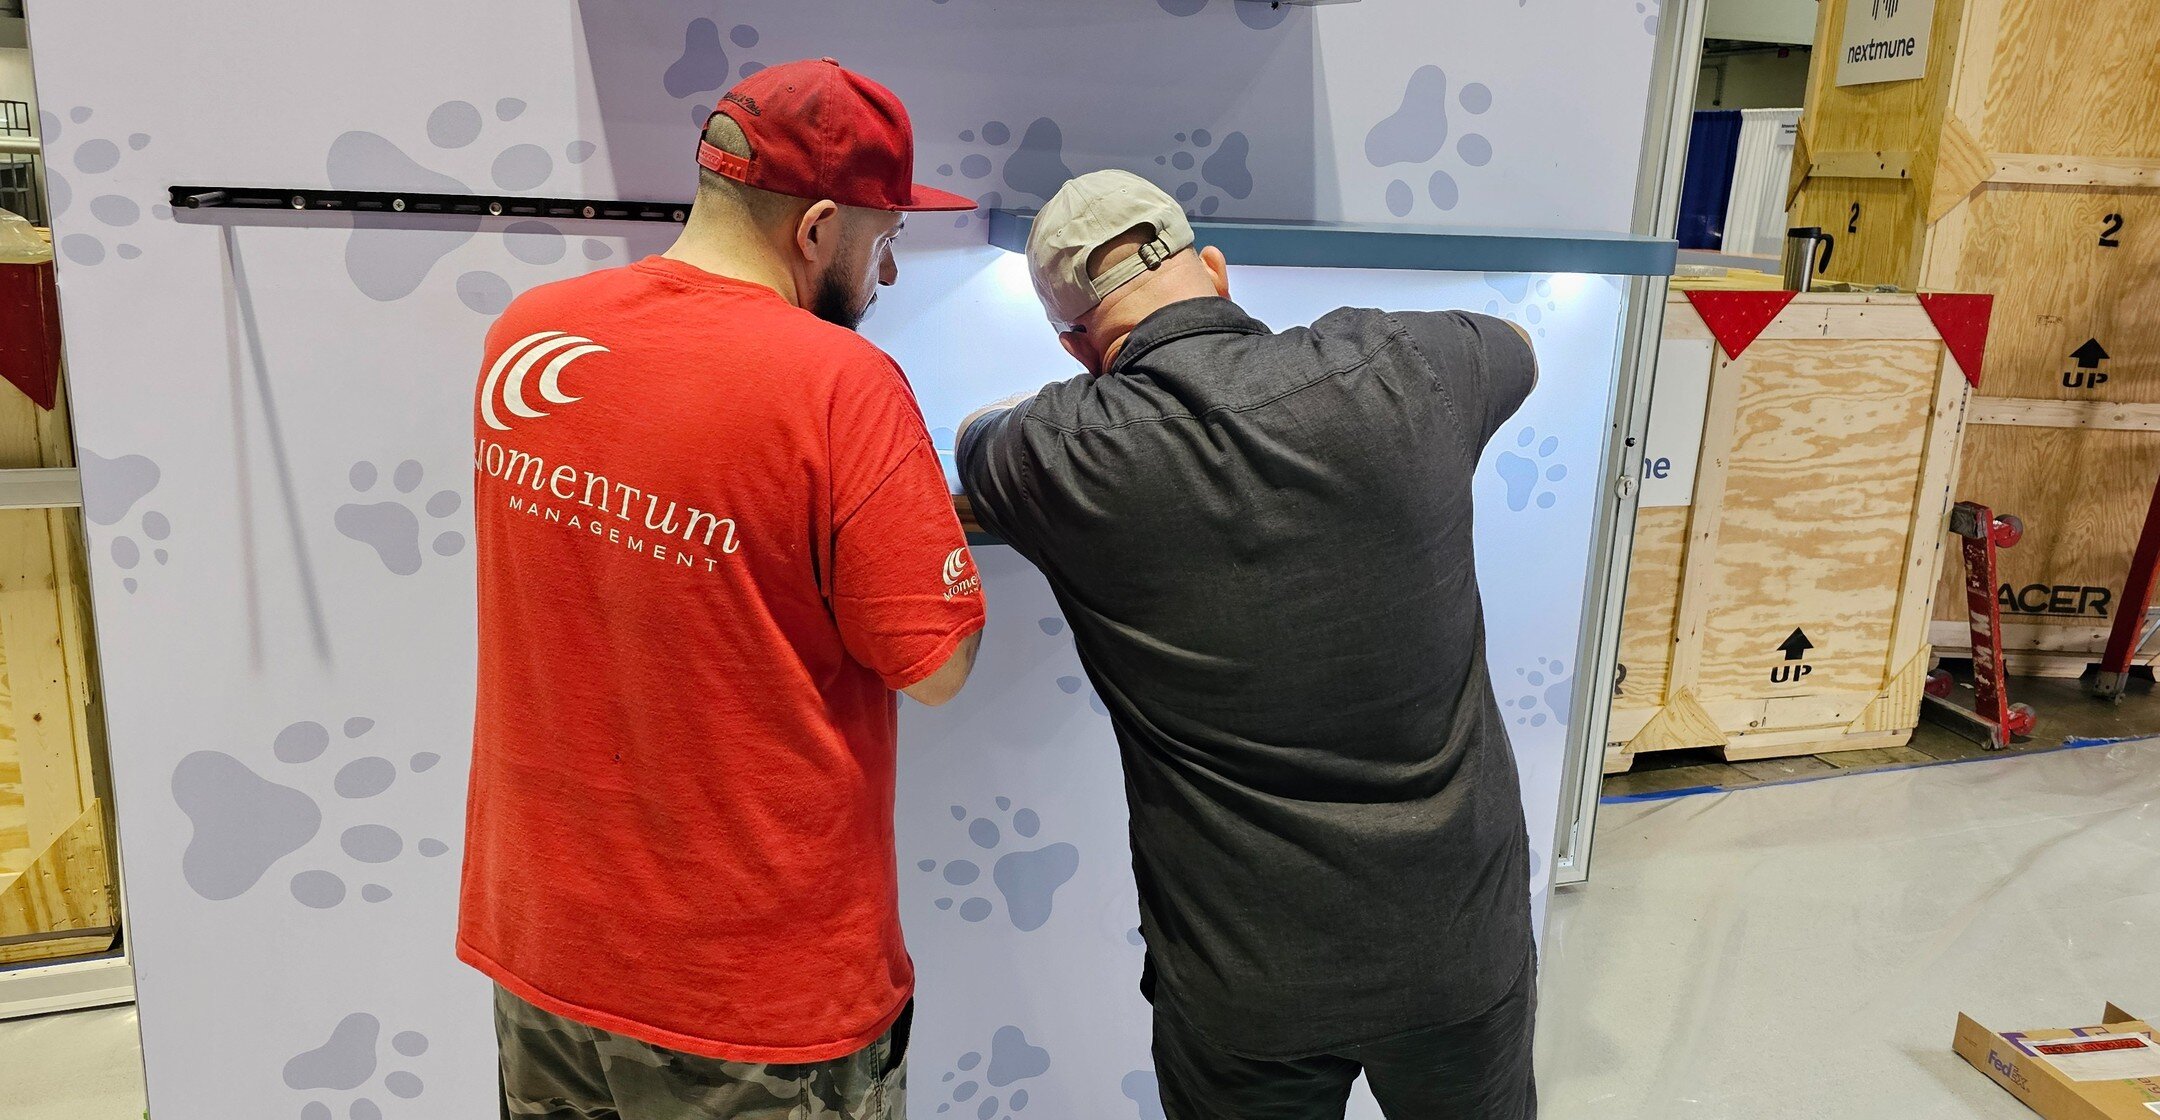 Getting up close and personal at #VMX2024 !

#eventmanagement #tradeshow #installandismantle #momentummanagement #exhibition #tradeshows #tradeshowbooth #events #tradeshowdisplay #productlaunch #boothbuilder #businesstobusiness #laborservices #laborp